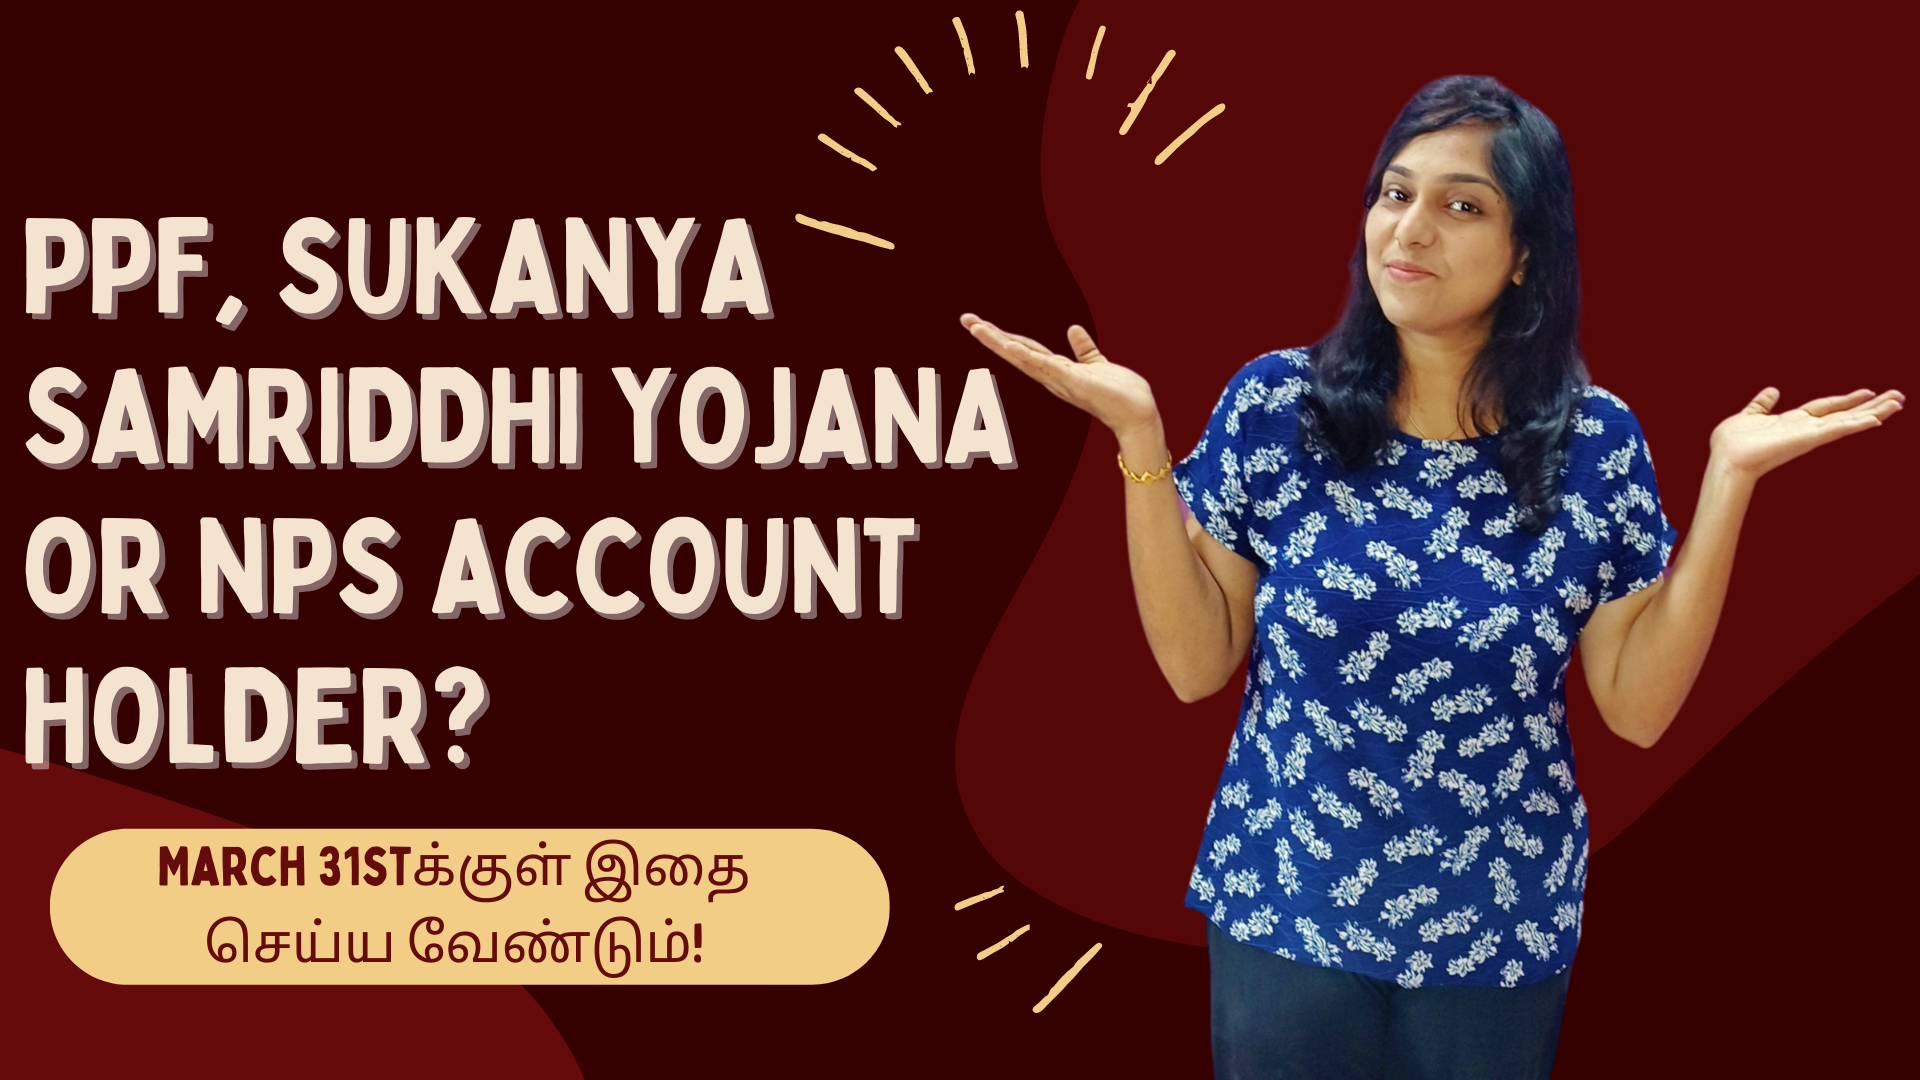 PPF, Sukanya Samriddhi Yojana Or NPS Account Holder? You MUST Do This Before March 31st!